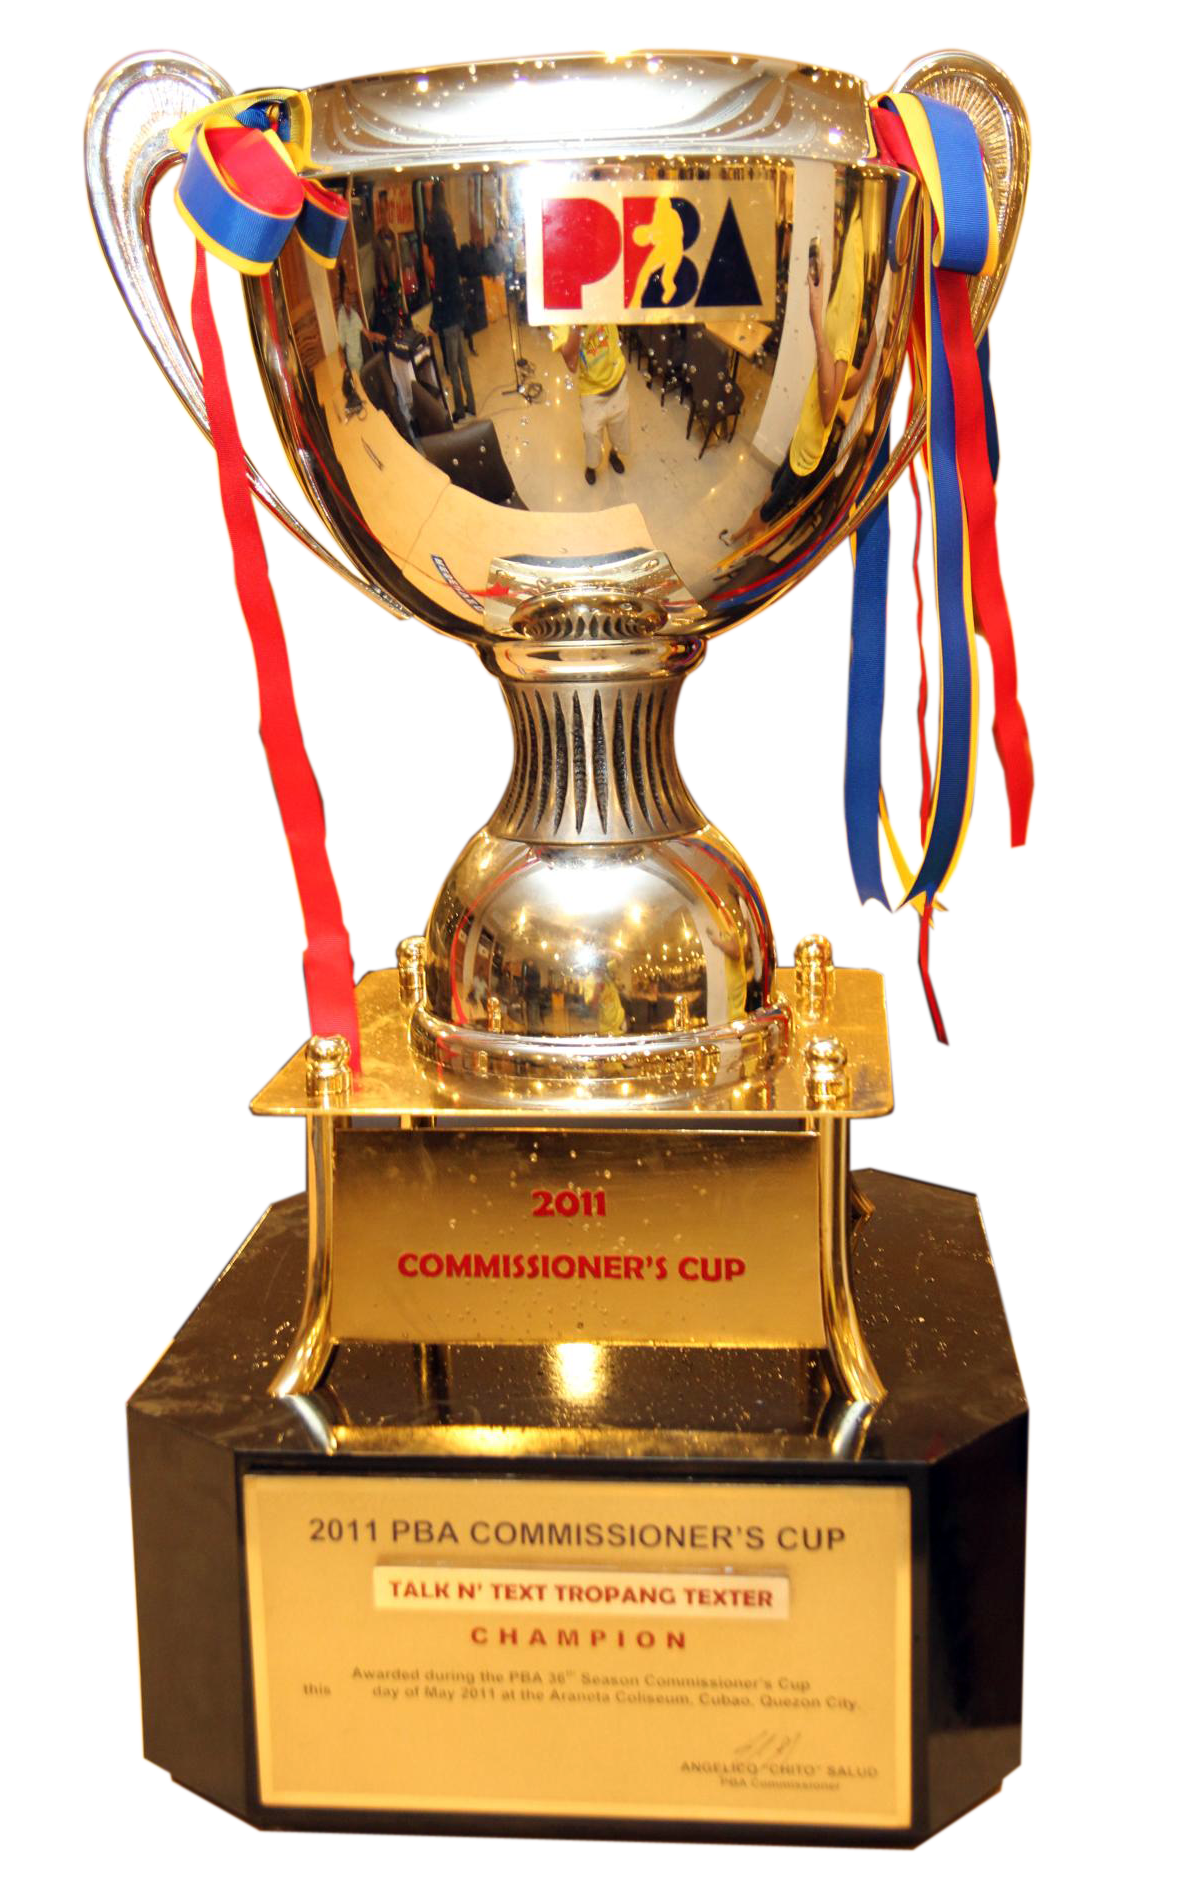 Trophy-Free-PNG-Image.png